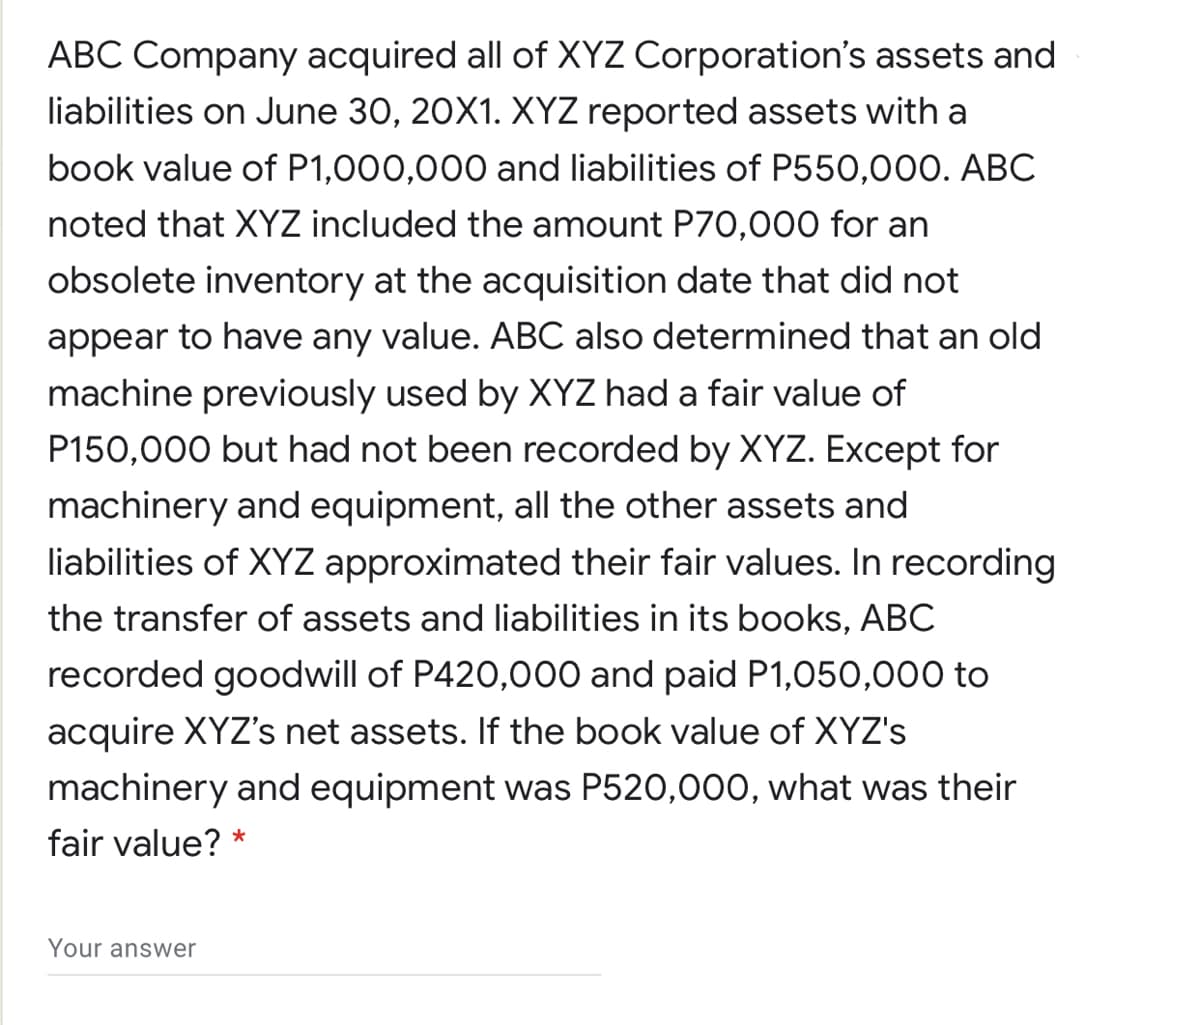 ABC Company acquired all of XYZ Corporation's assets and
liabilities on June 30, 20X1. XYZ reported assets with a
book value of P1,000,000 and liabilities of P550,000. ABC
noted that XYZ included the amount P70,000 for an
obsolete inventory at the acquisition date that did not
appear to have any value. ABC also determined that an old
machine previously used by XYZ had a fair value of
P150,000 but had not been recorded by XYZ. Except for
machinery and equipment, all the other assets and
liabilities of XYZ approximated their fair values. In recording
the transfer of assets and liabilities in its books, ABC
recorded goodwill of P420,000 and paid P1,050,000 to
acquire XYZ's net assets. If the book value of XYZ's
machinery and equipment was P520,000, what was their
fair value? *
Your answwer
